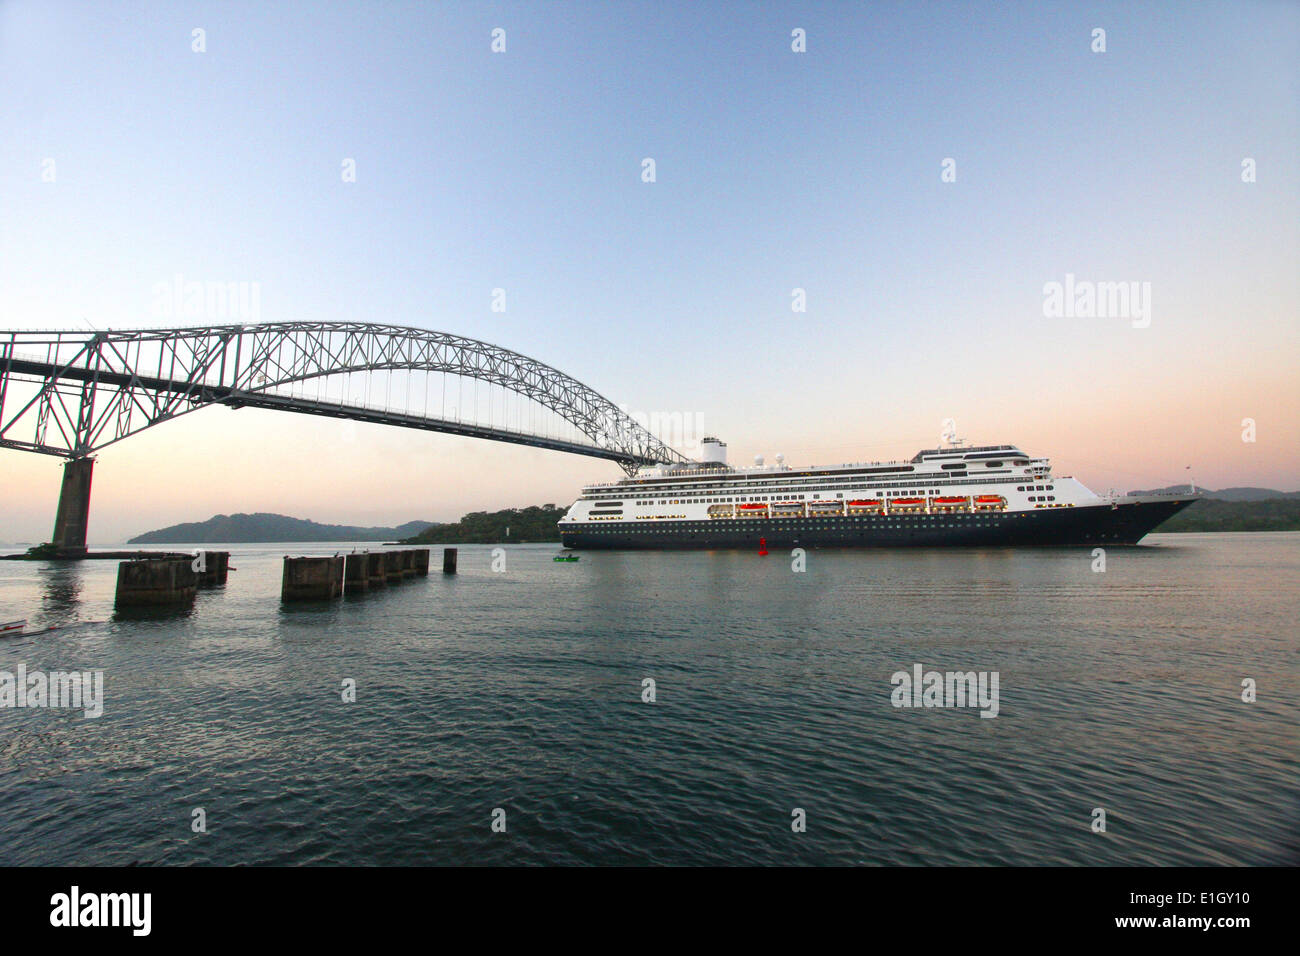 Cruise ship sailing under the Bridge of the Americas at sunrise. The ship is entering the Panama Canal on the Pacific side. Stock Photo